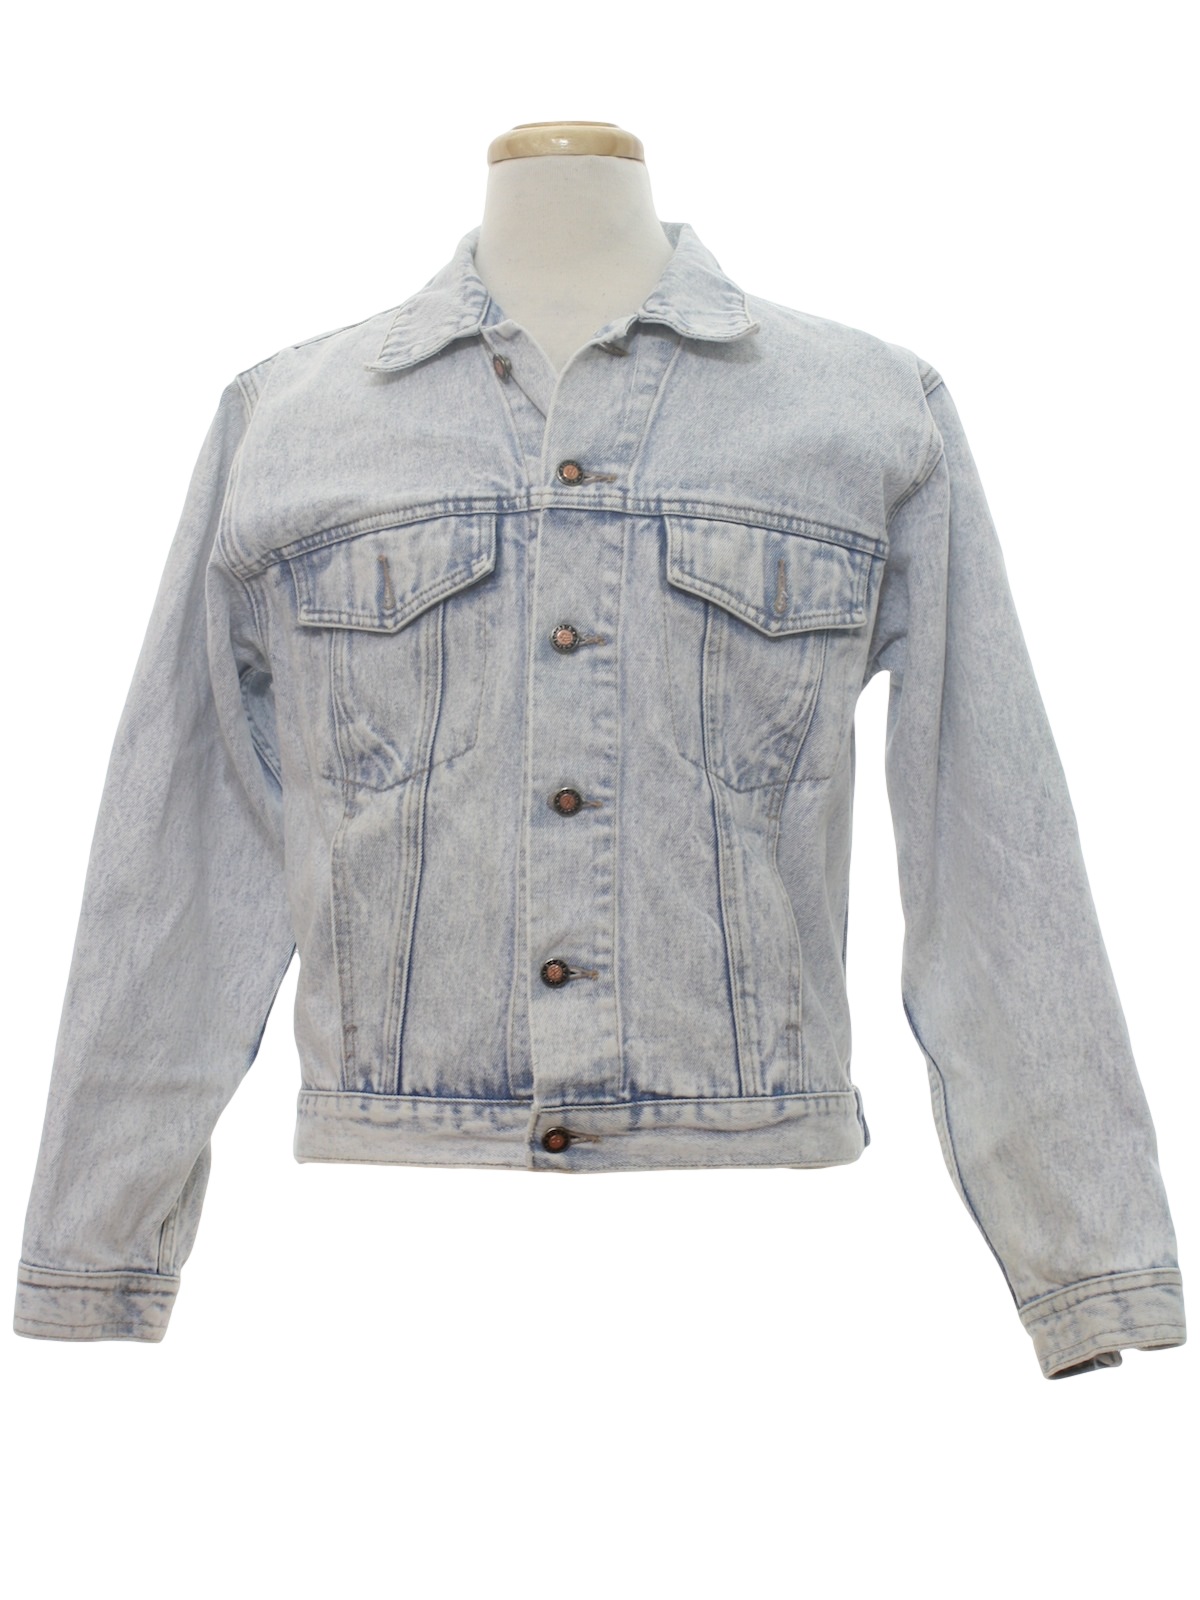 1980's Vintage Todays News Jacket: 80s -Todays News- Mens faded blue ...